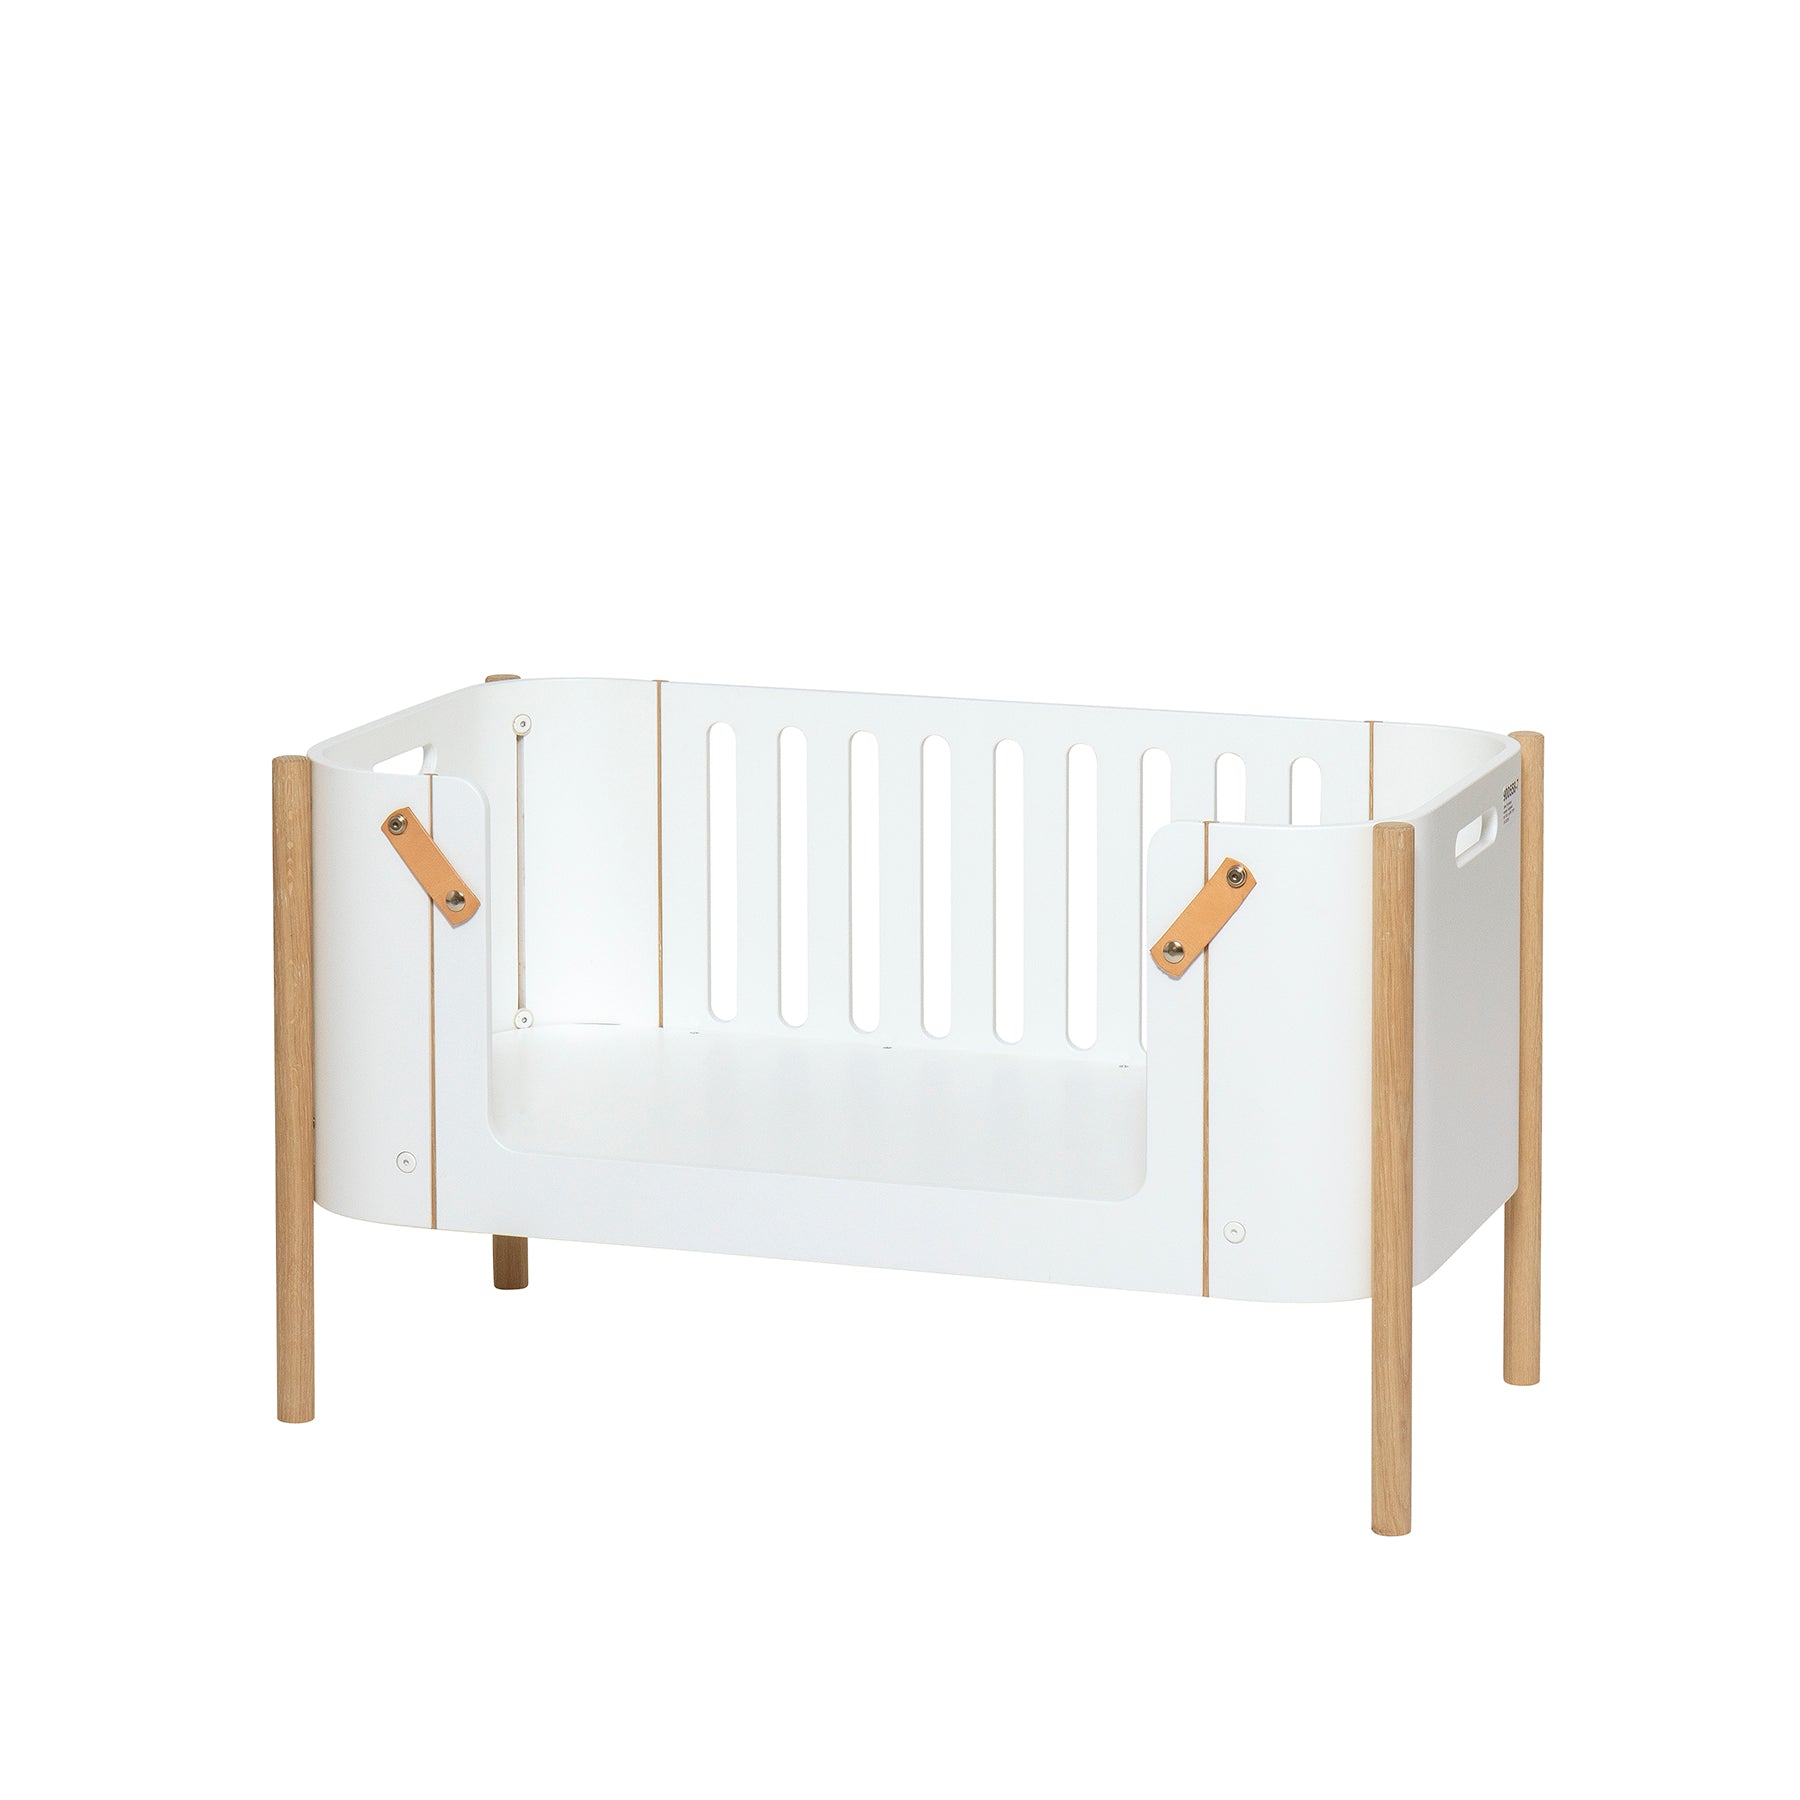 oliver-furniture-wood-co-sleeper-incl-bench-conversion-42x82-cm-white-oak-with-holder-canopy-mattress- (2)